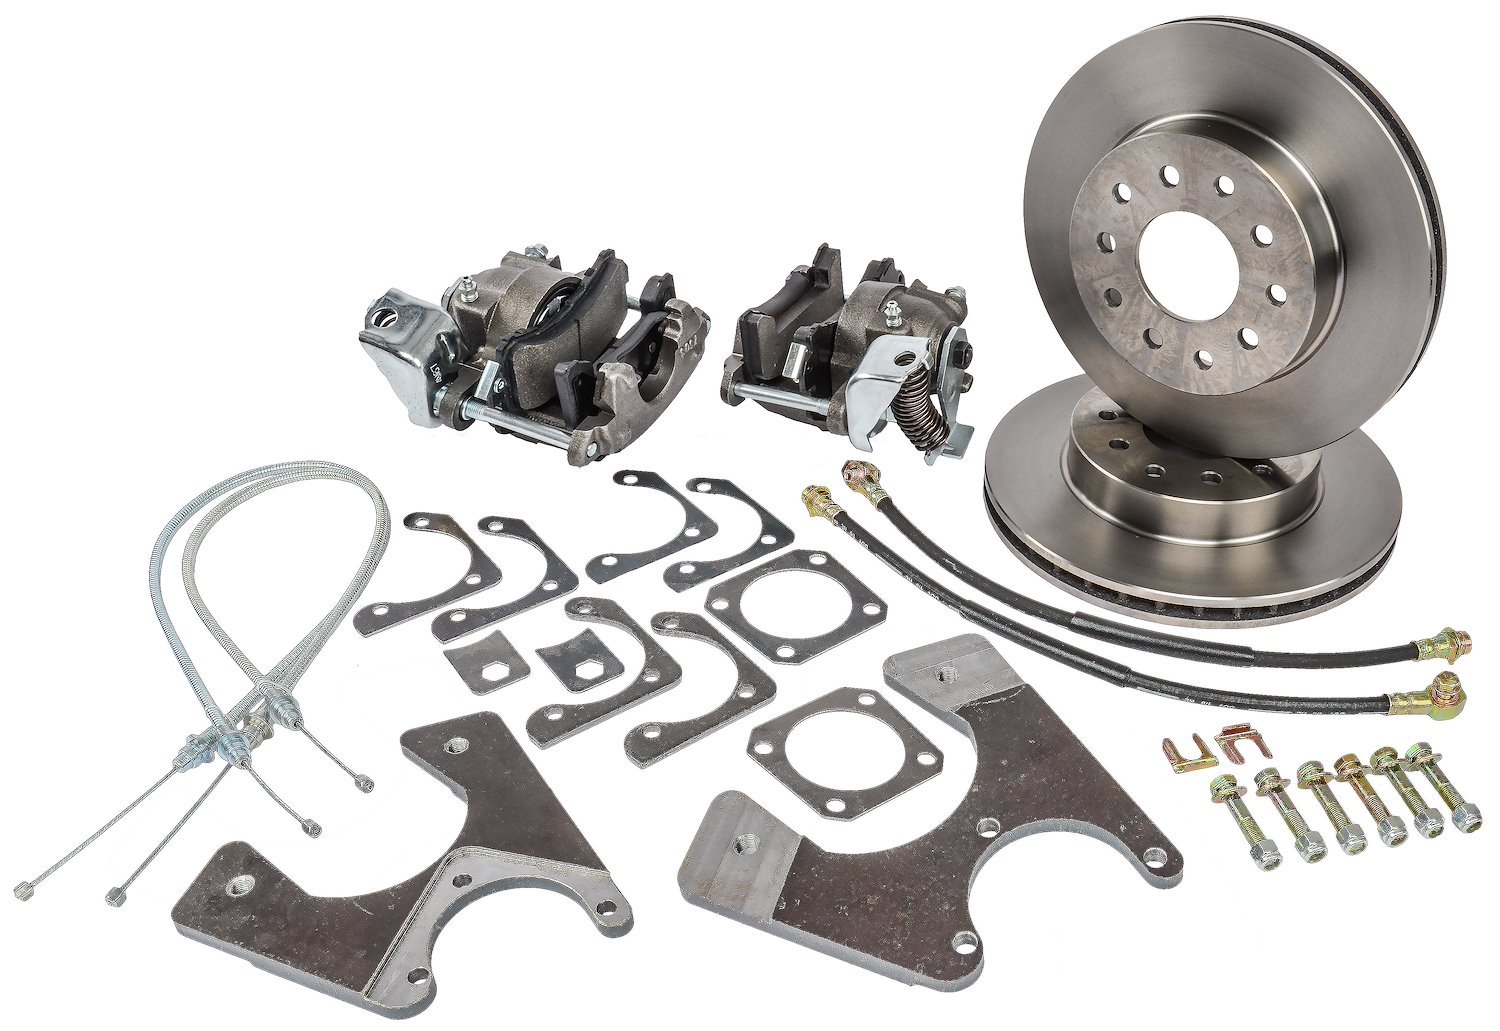 GM 10 & 12 Bolt Rear Disc Brake Conversion Kit for 1964-1972 GM A-Body [Standard Kit with E-Brake & Raw Calipers]